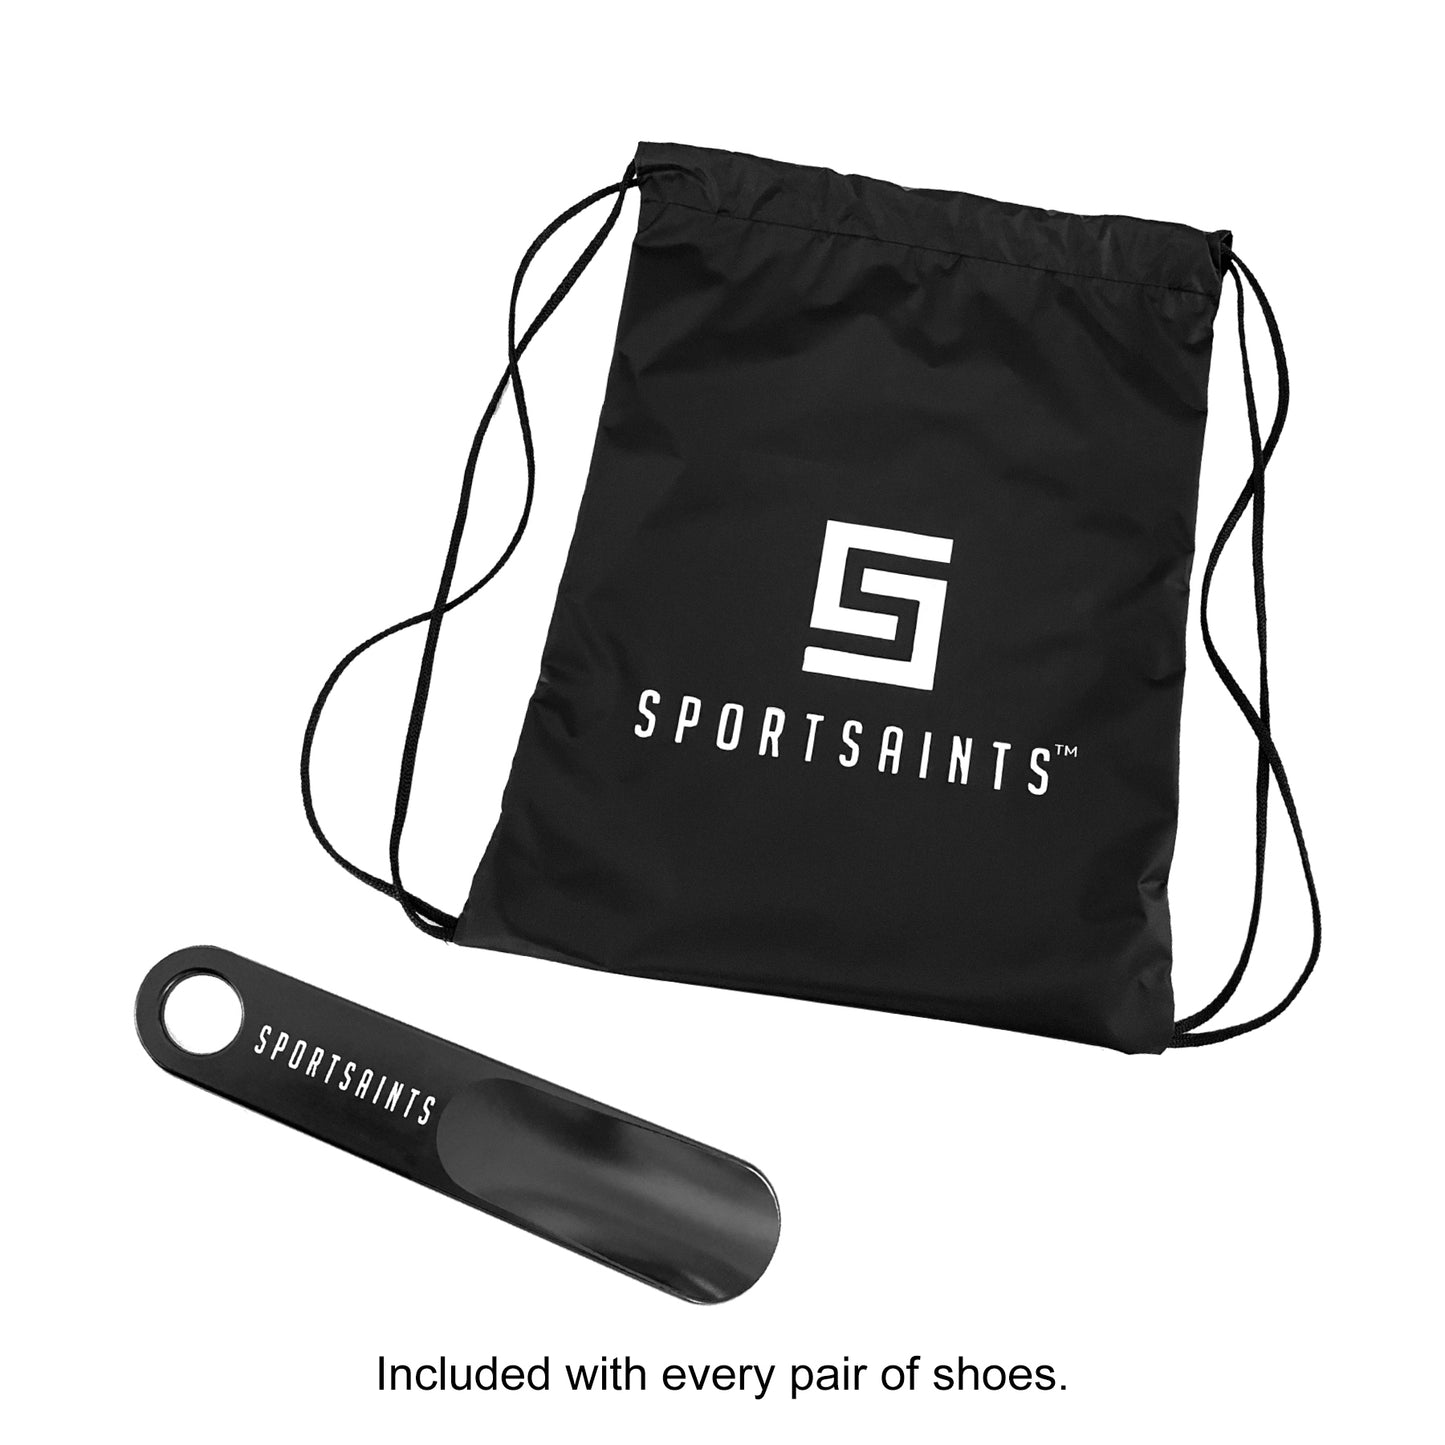 Drawstring shoe bag and shoe horn included with every pair.